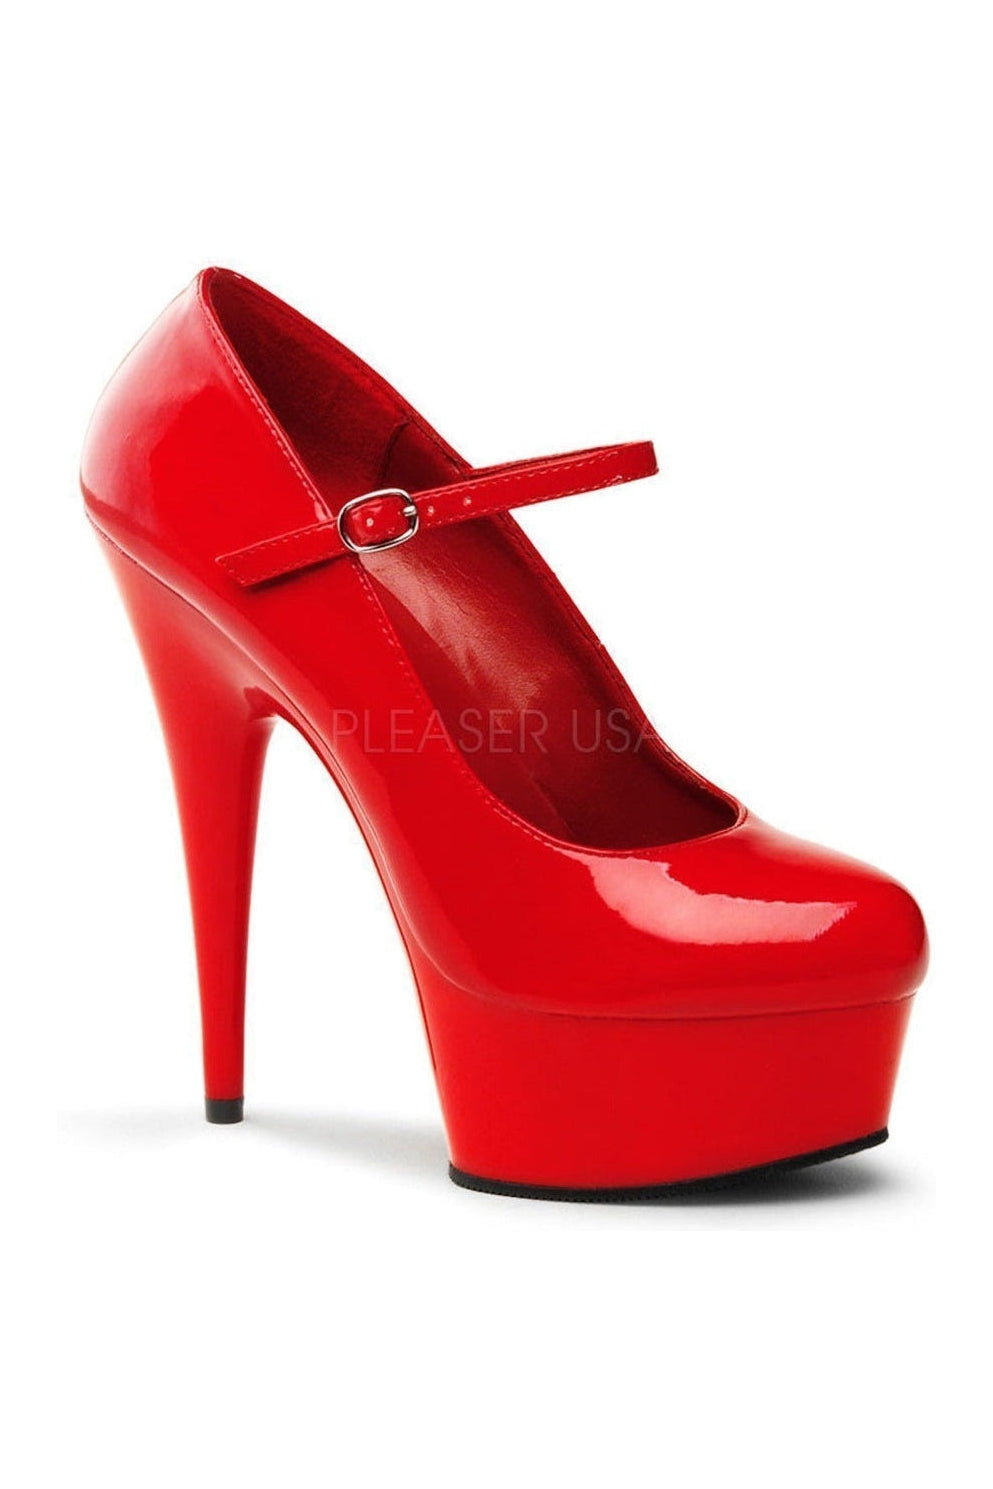 Pleaser Red Mary Janes Platform Stripper Shoes | Buy at Sexyshoes.com